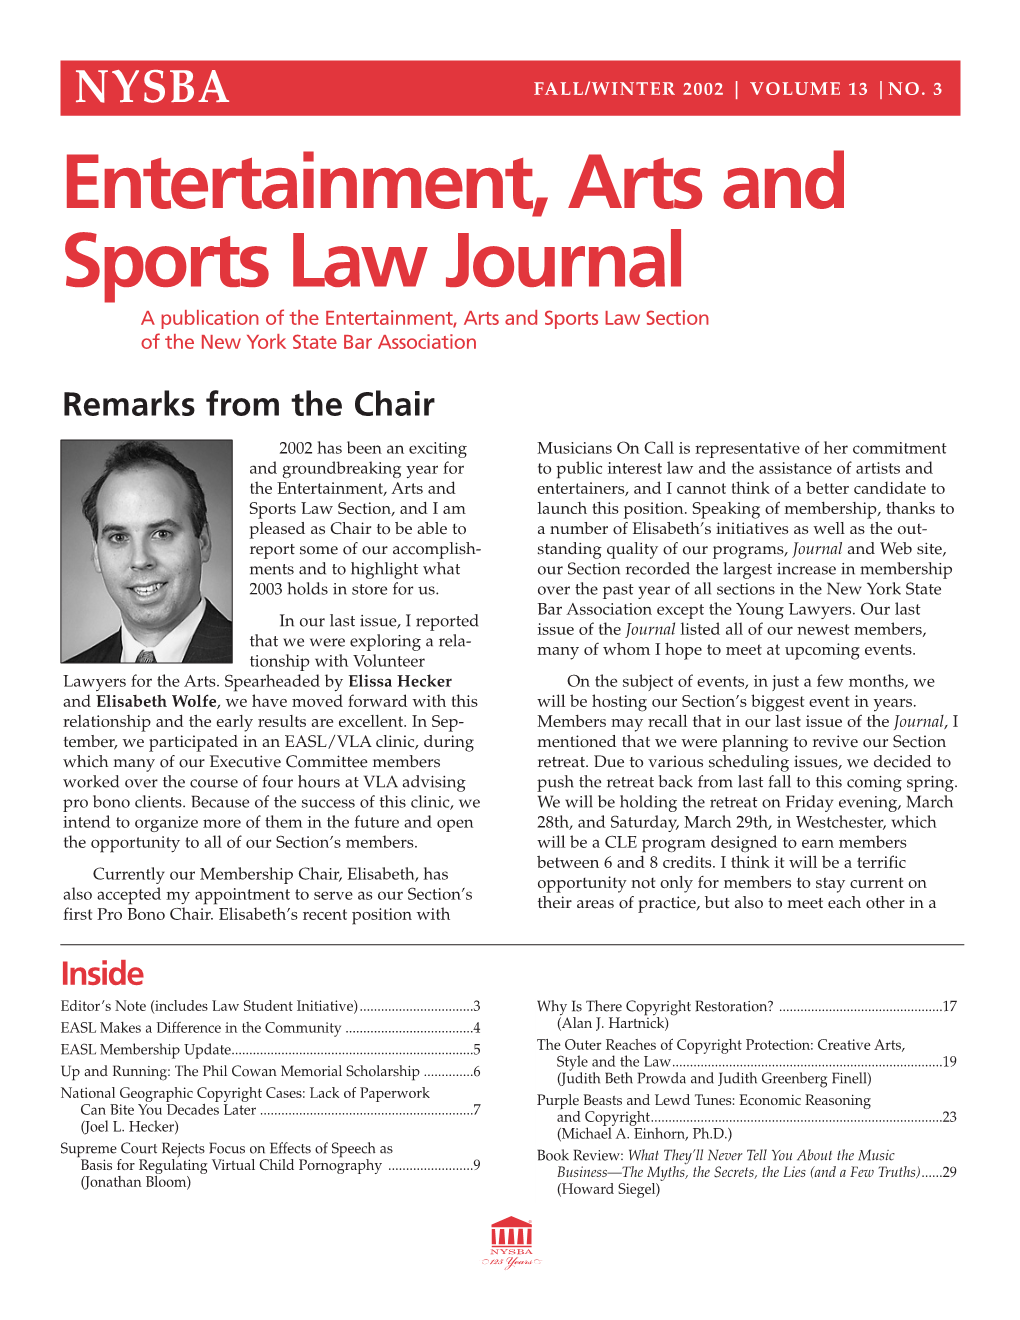 NYSBA Entertainment, Arts and Sports Law Journal | Fall/Winter 2002 | Vol